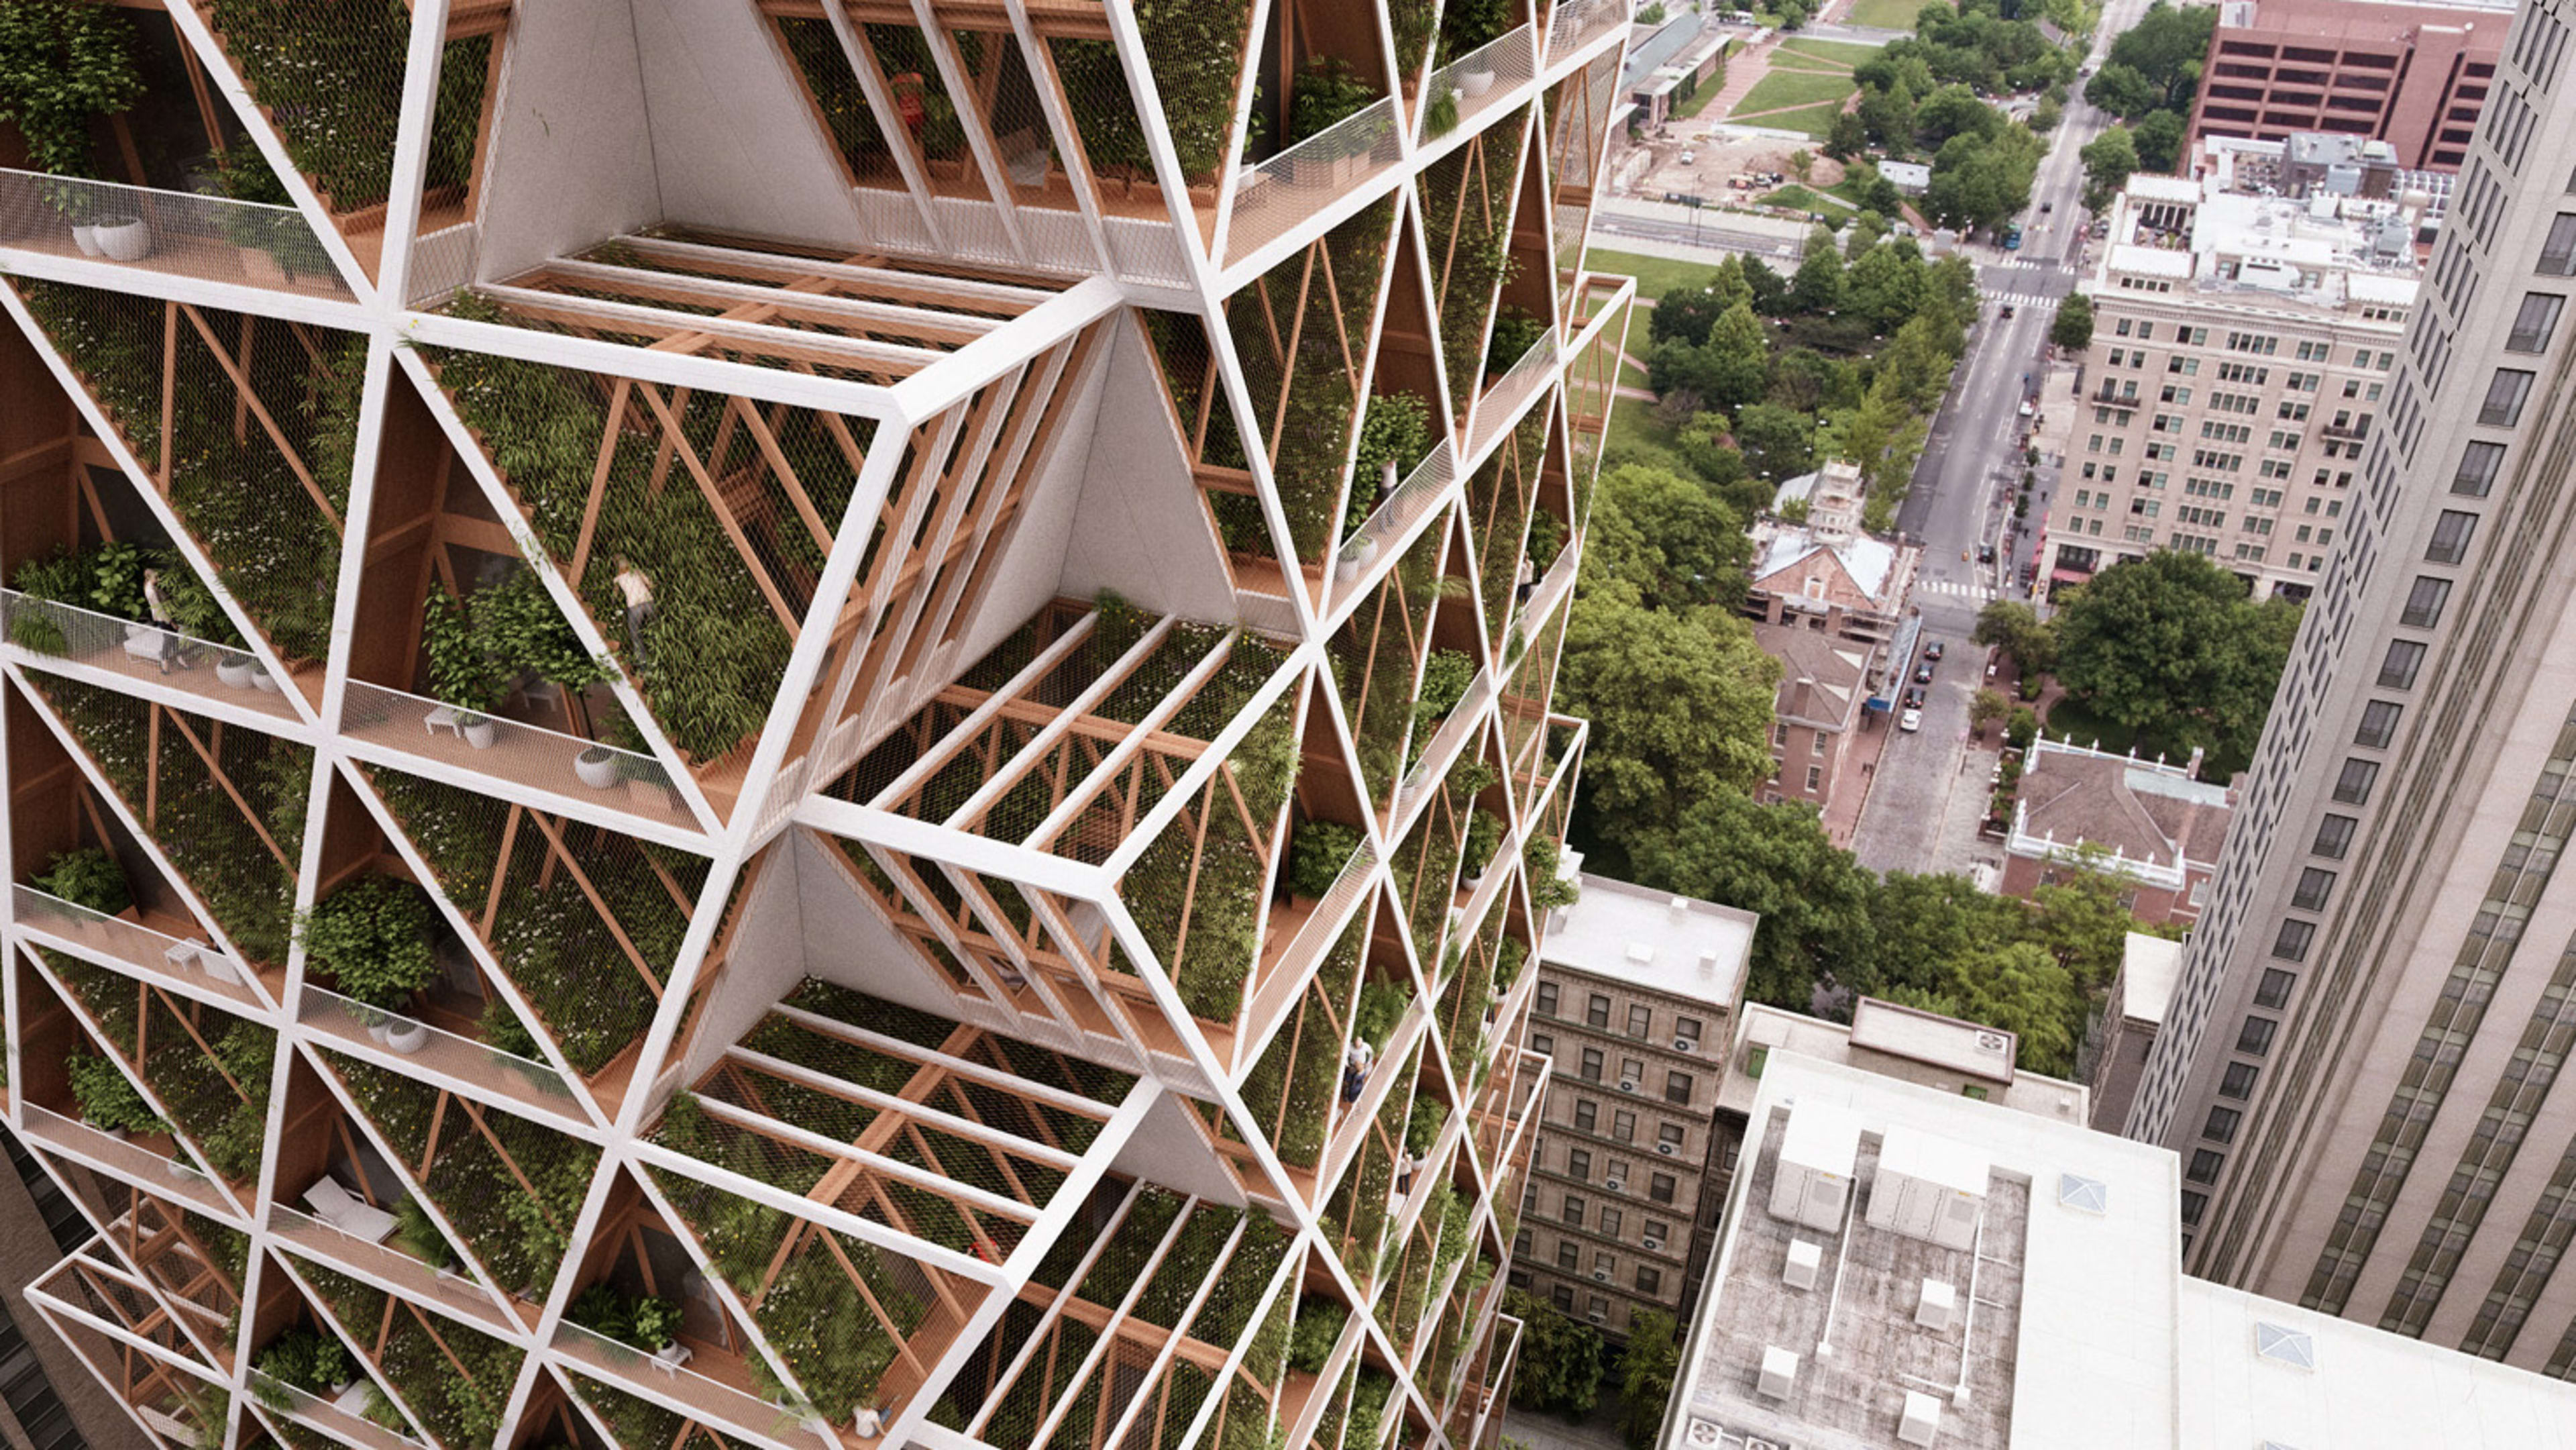 Live in your own farm in the sky in this plant-covered apartment building